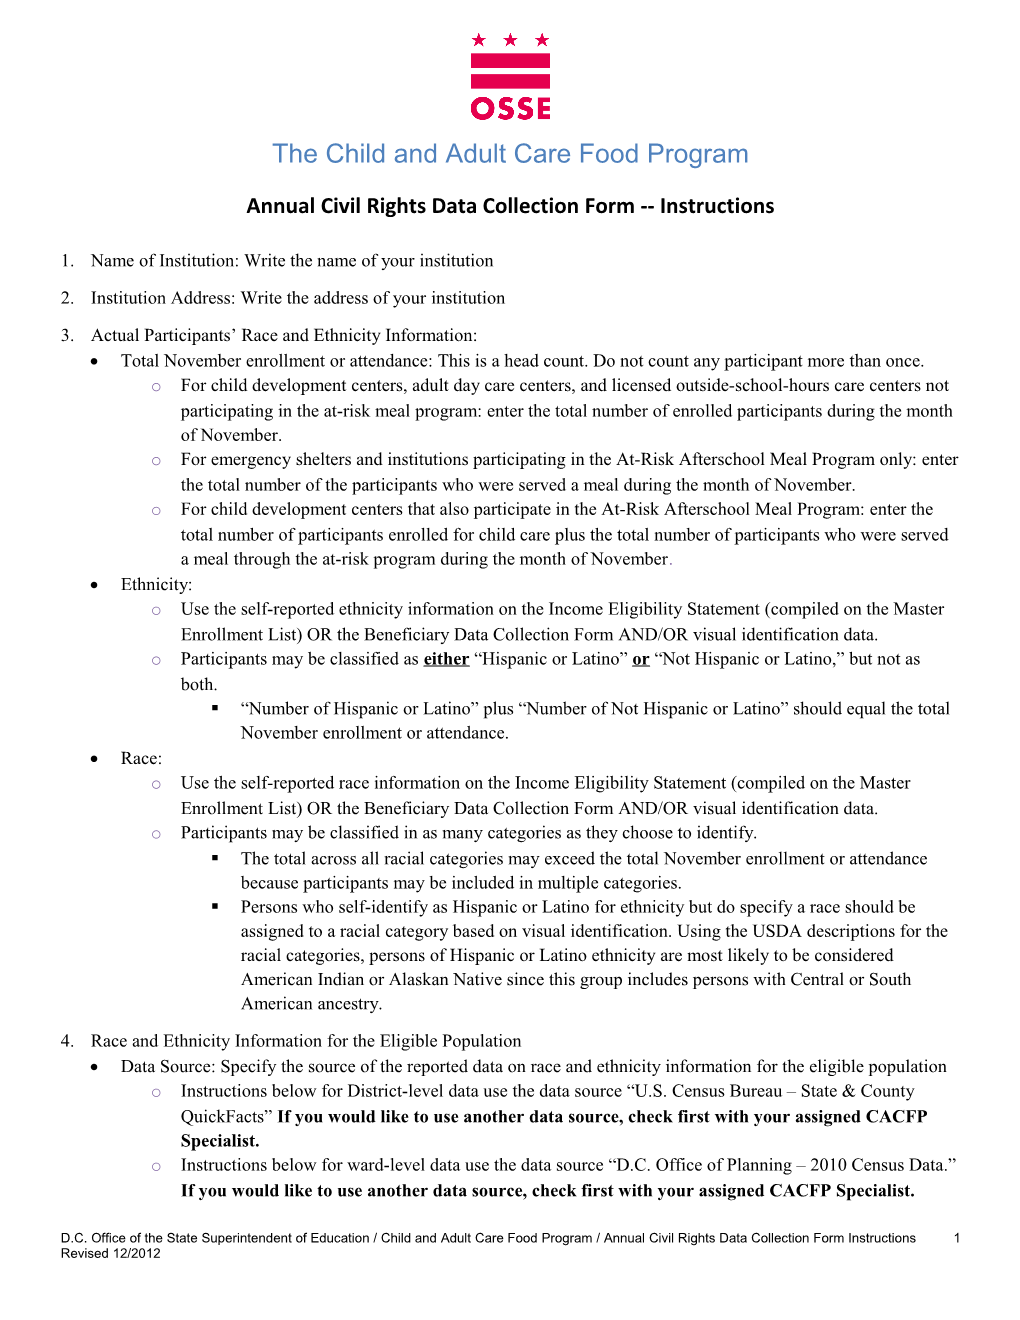 Annual Civil Rights Data Collection Form Instructions